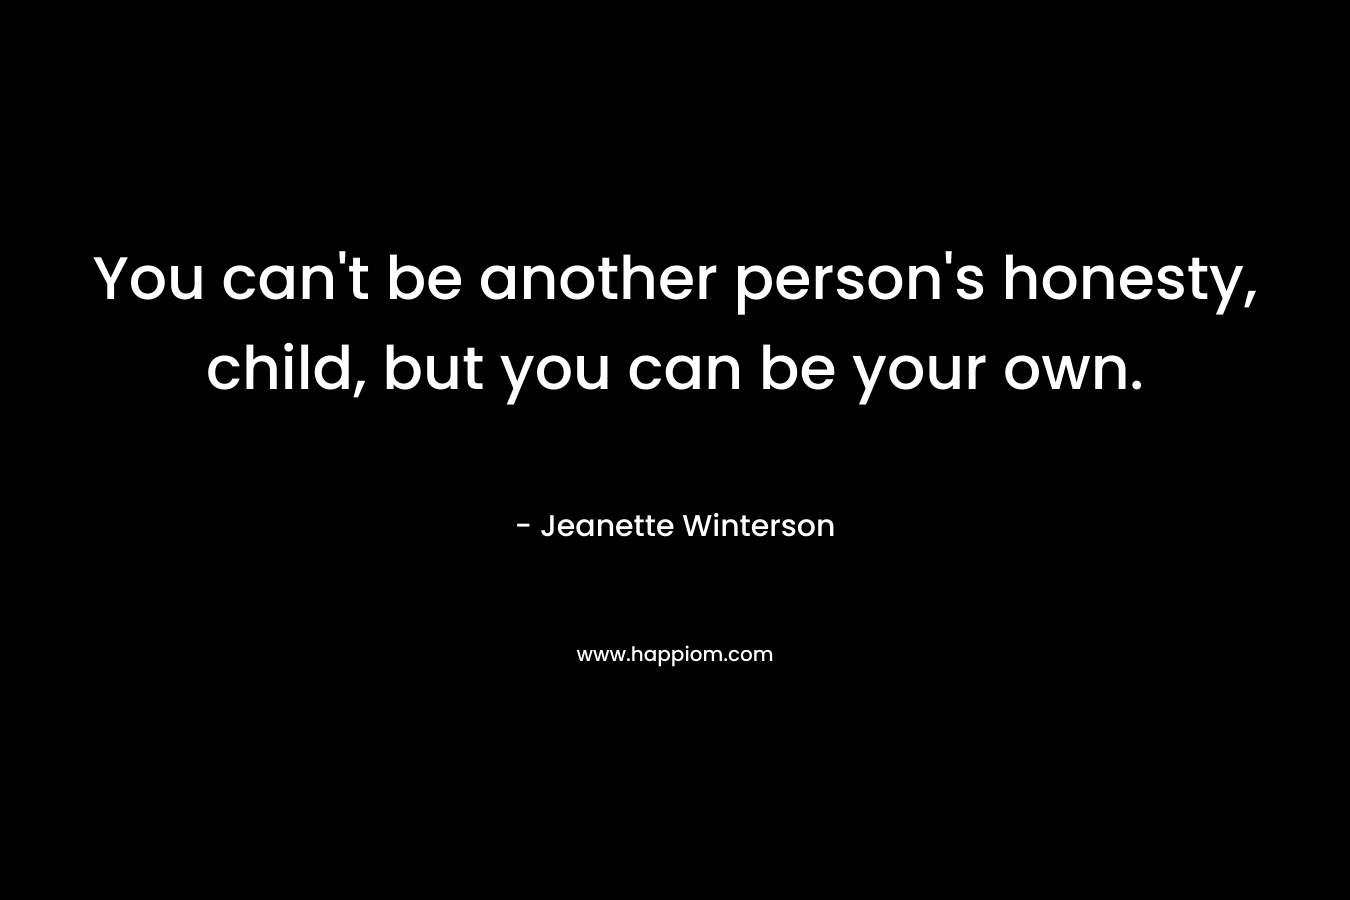 You can't be another person's honesty, child, but you can be your own.